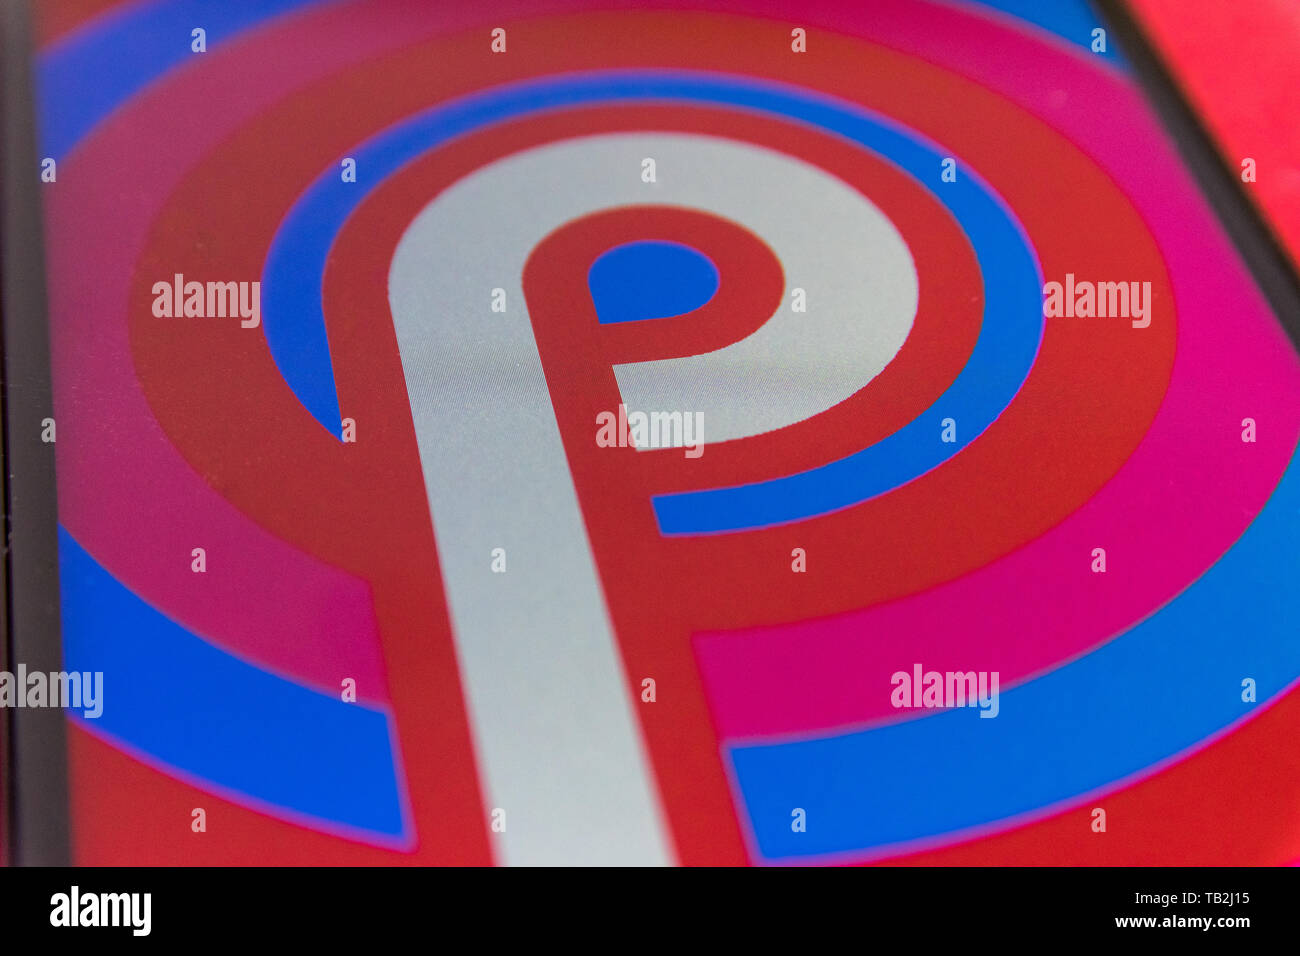 Cluj, Romania - May 13, 2019: Android Pie logo on a phone screen. It is the ninth major release and the 16th version of the Android mobile operating s Stock Photo